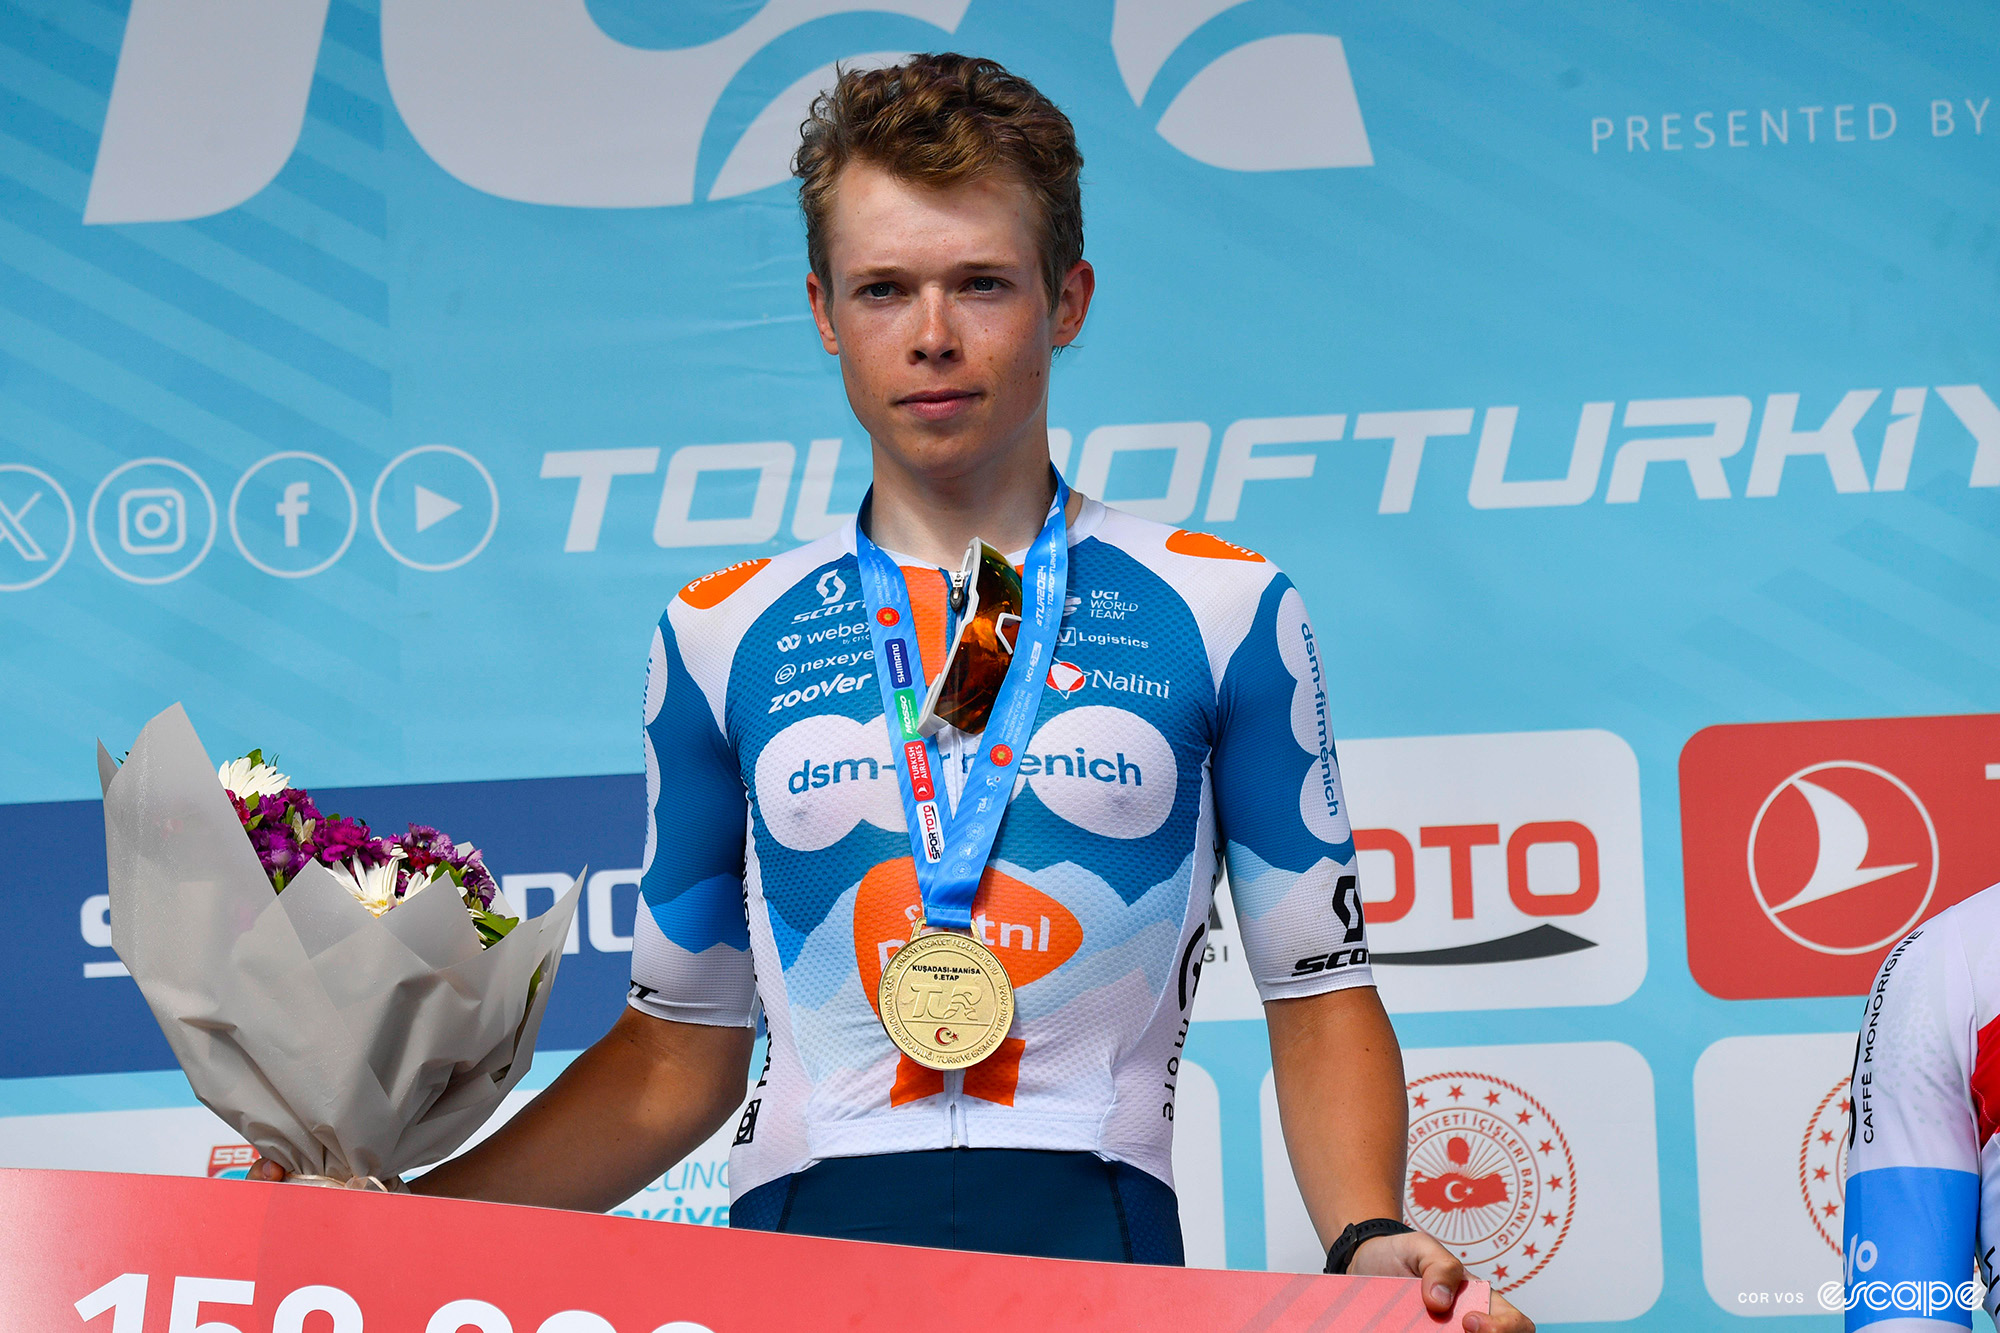 DSM Firmenich-PostNL's Frank van den Broek stands on the podium of the Tour of Turkey. He has a large winner's medal around his neck and a bouquet of flowers in his right hand, and is wearing a carefully neutral expression.